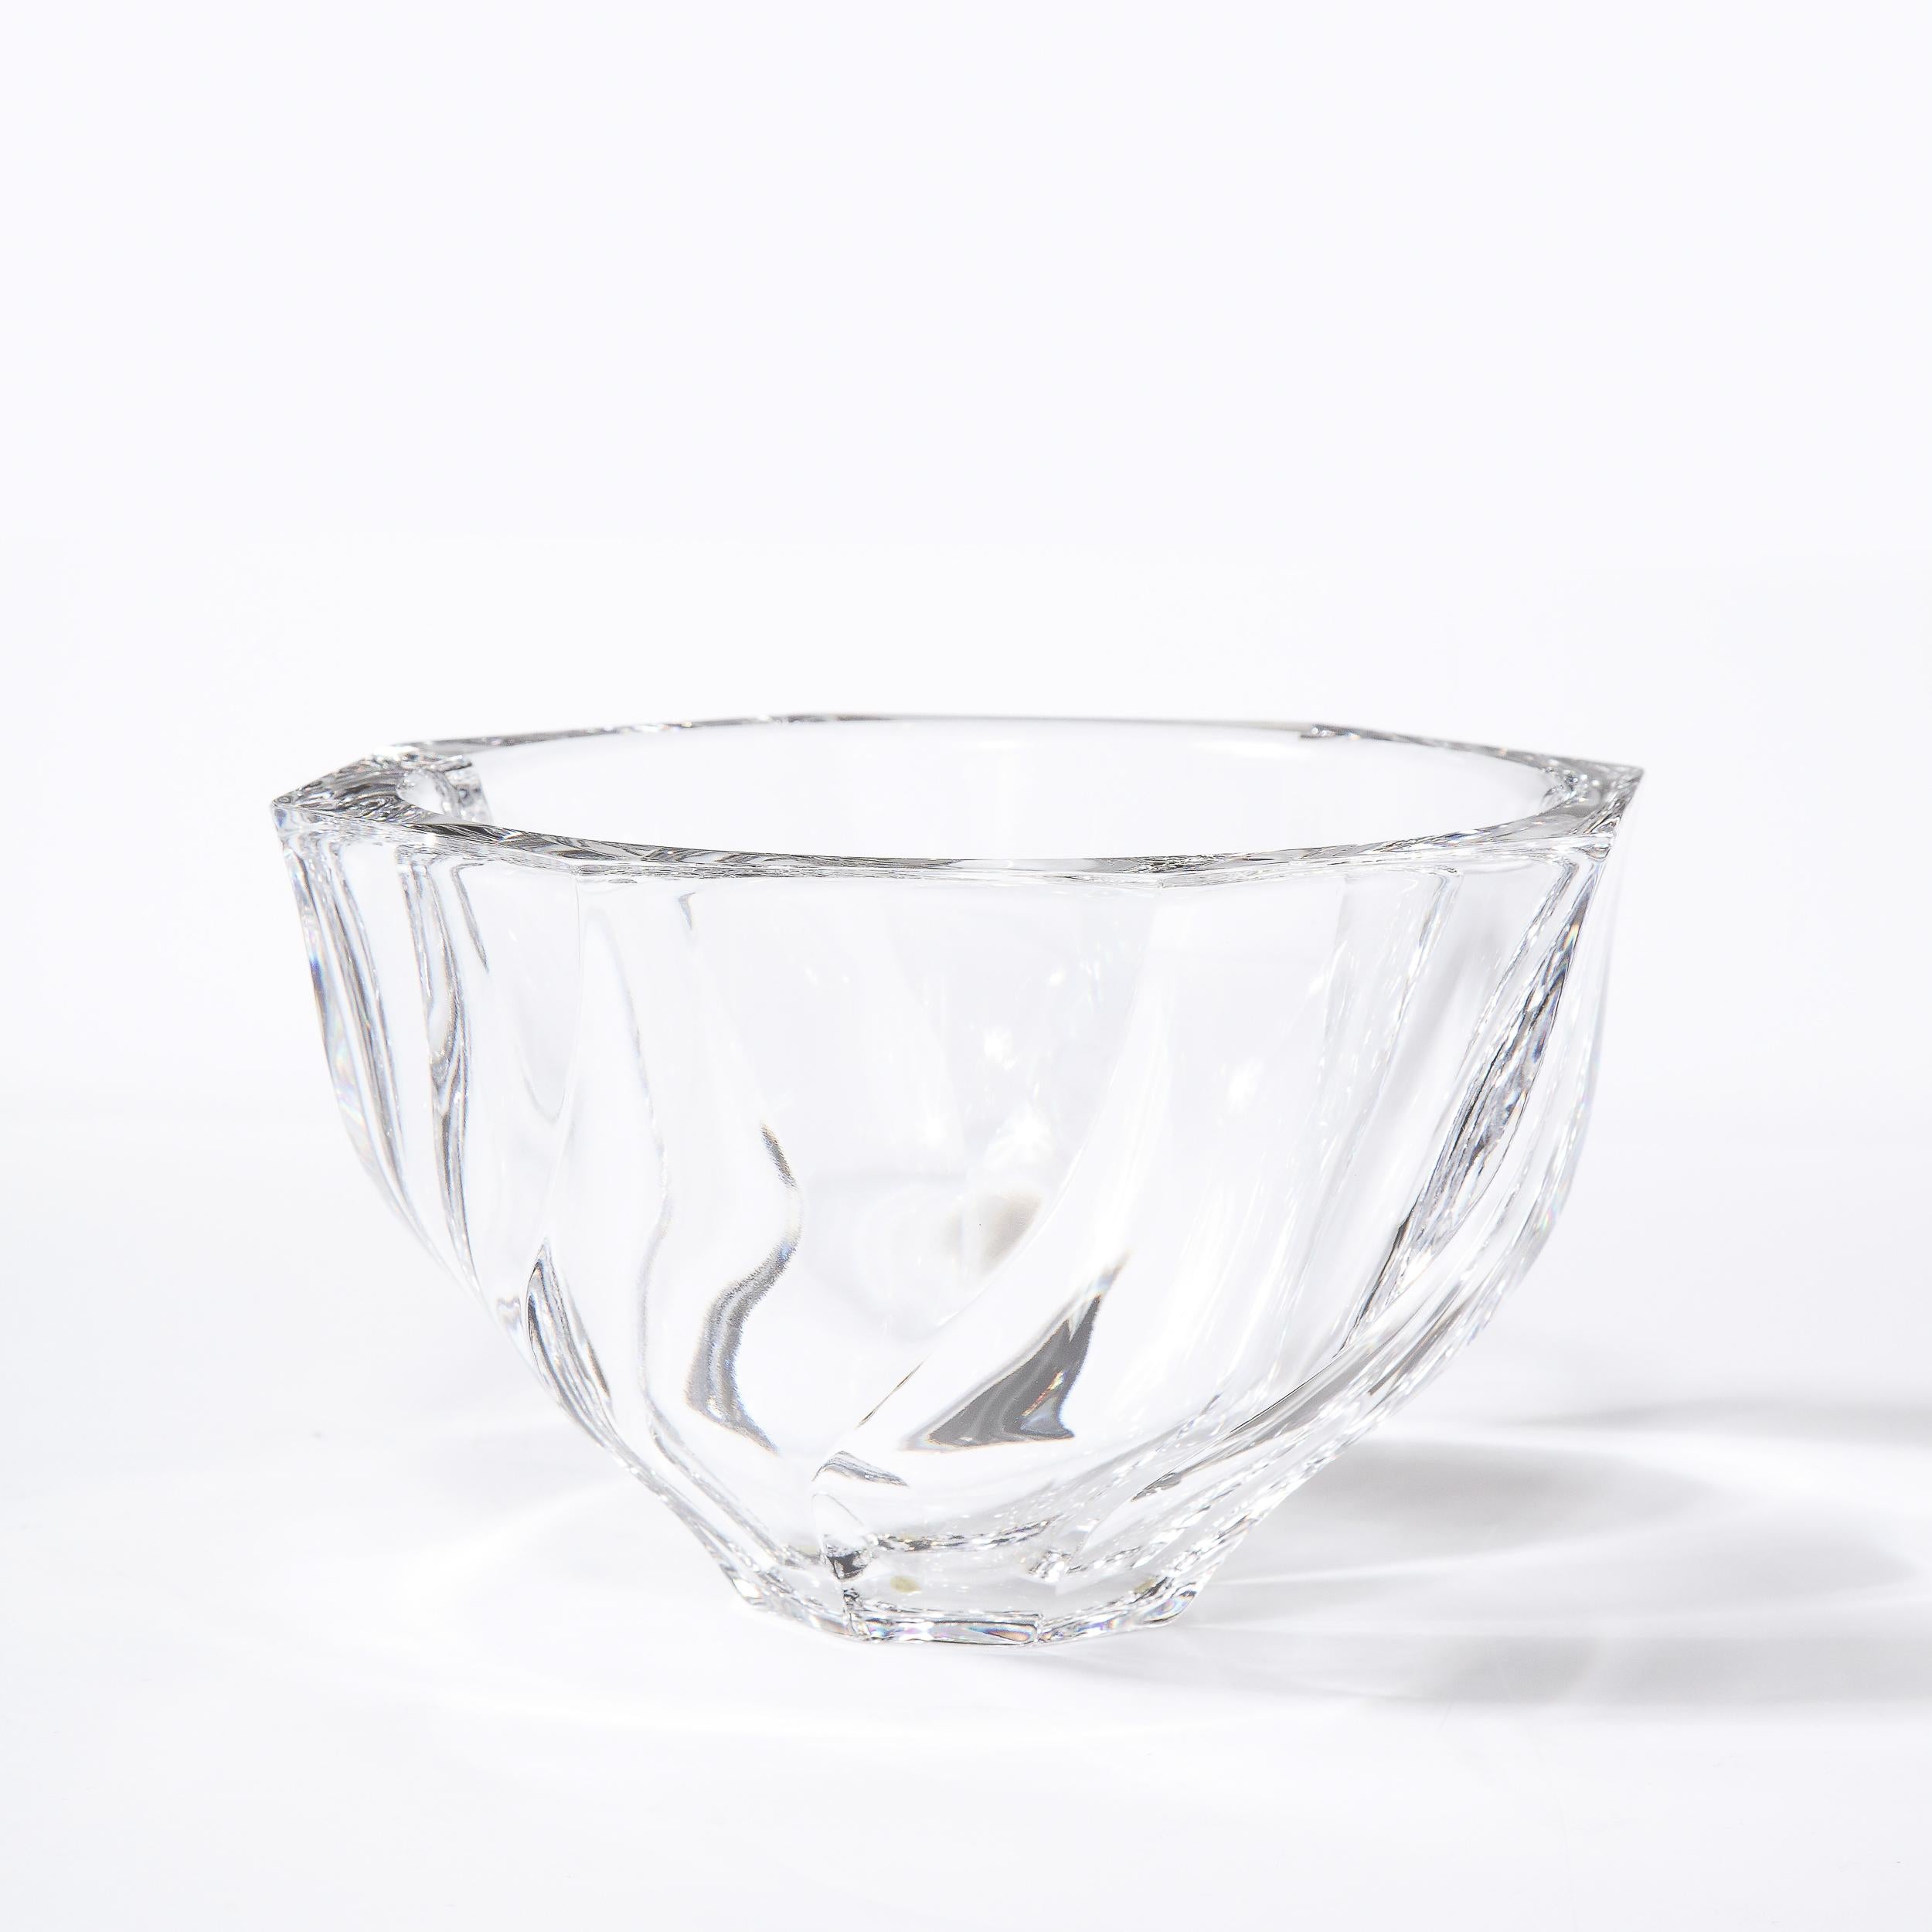 Scandinavian Modernist Faceted Translucent Glass Bowl Signed Orrefors In Excellent Condition For Sale In New York, NY